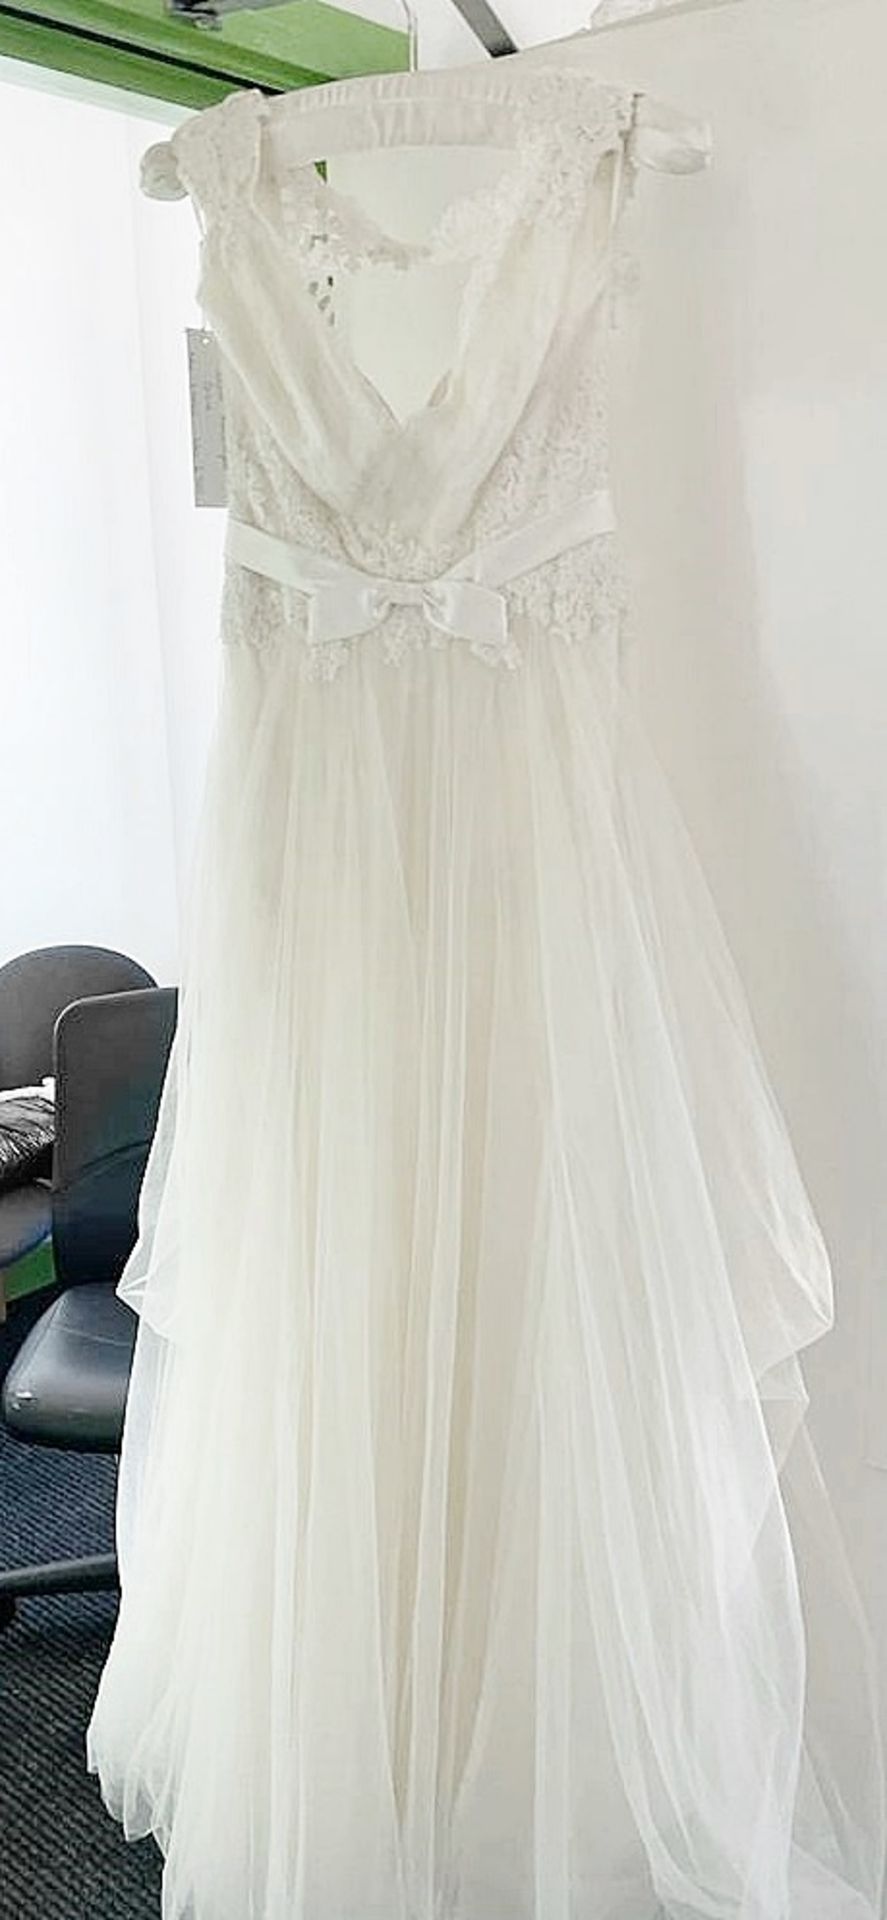 1 x LUSAN MANDONGUS 'Grace' Stunning Designer Wedding Dress Bridal Gown In lace With